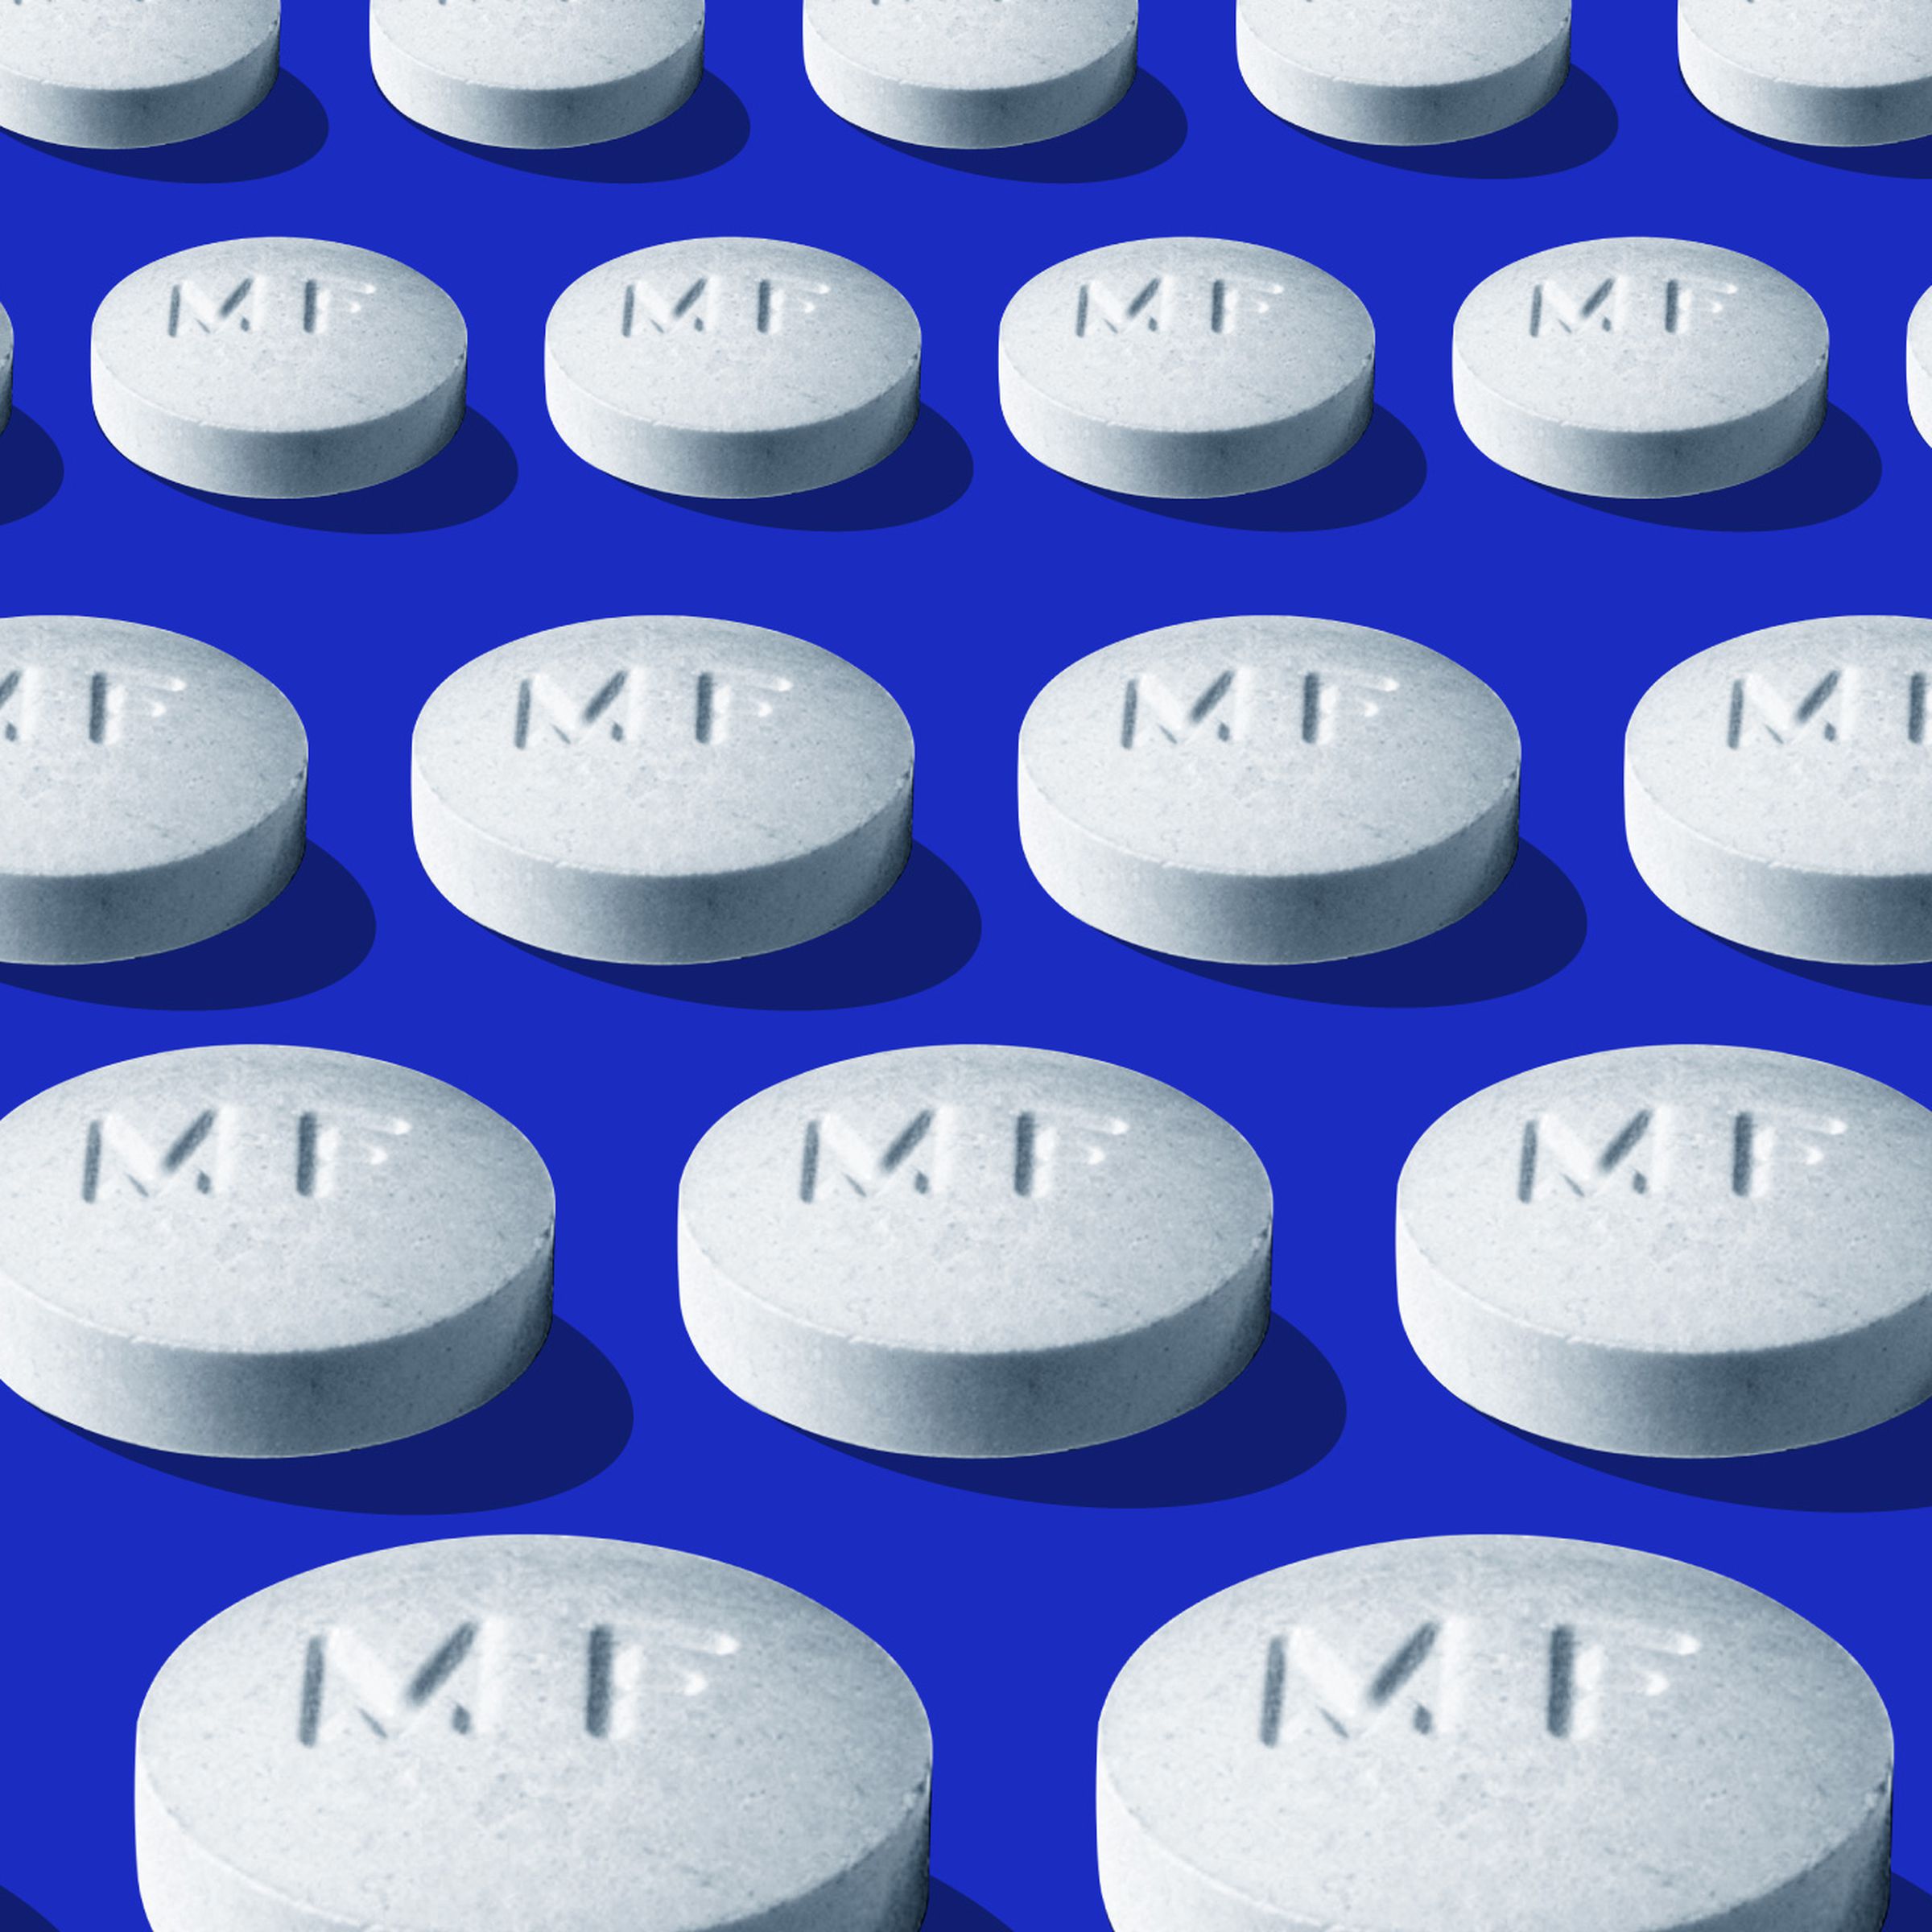 Several rows of white pills on a blue background.